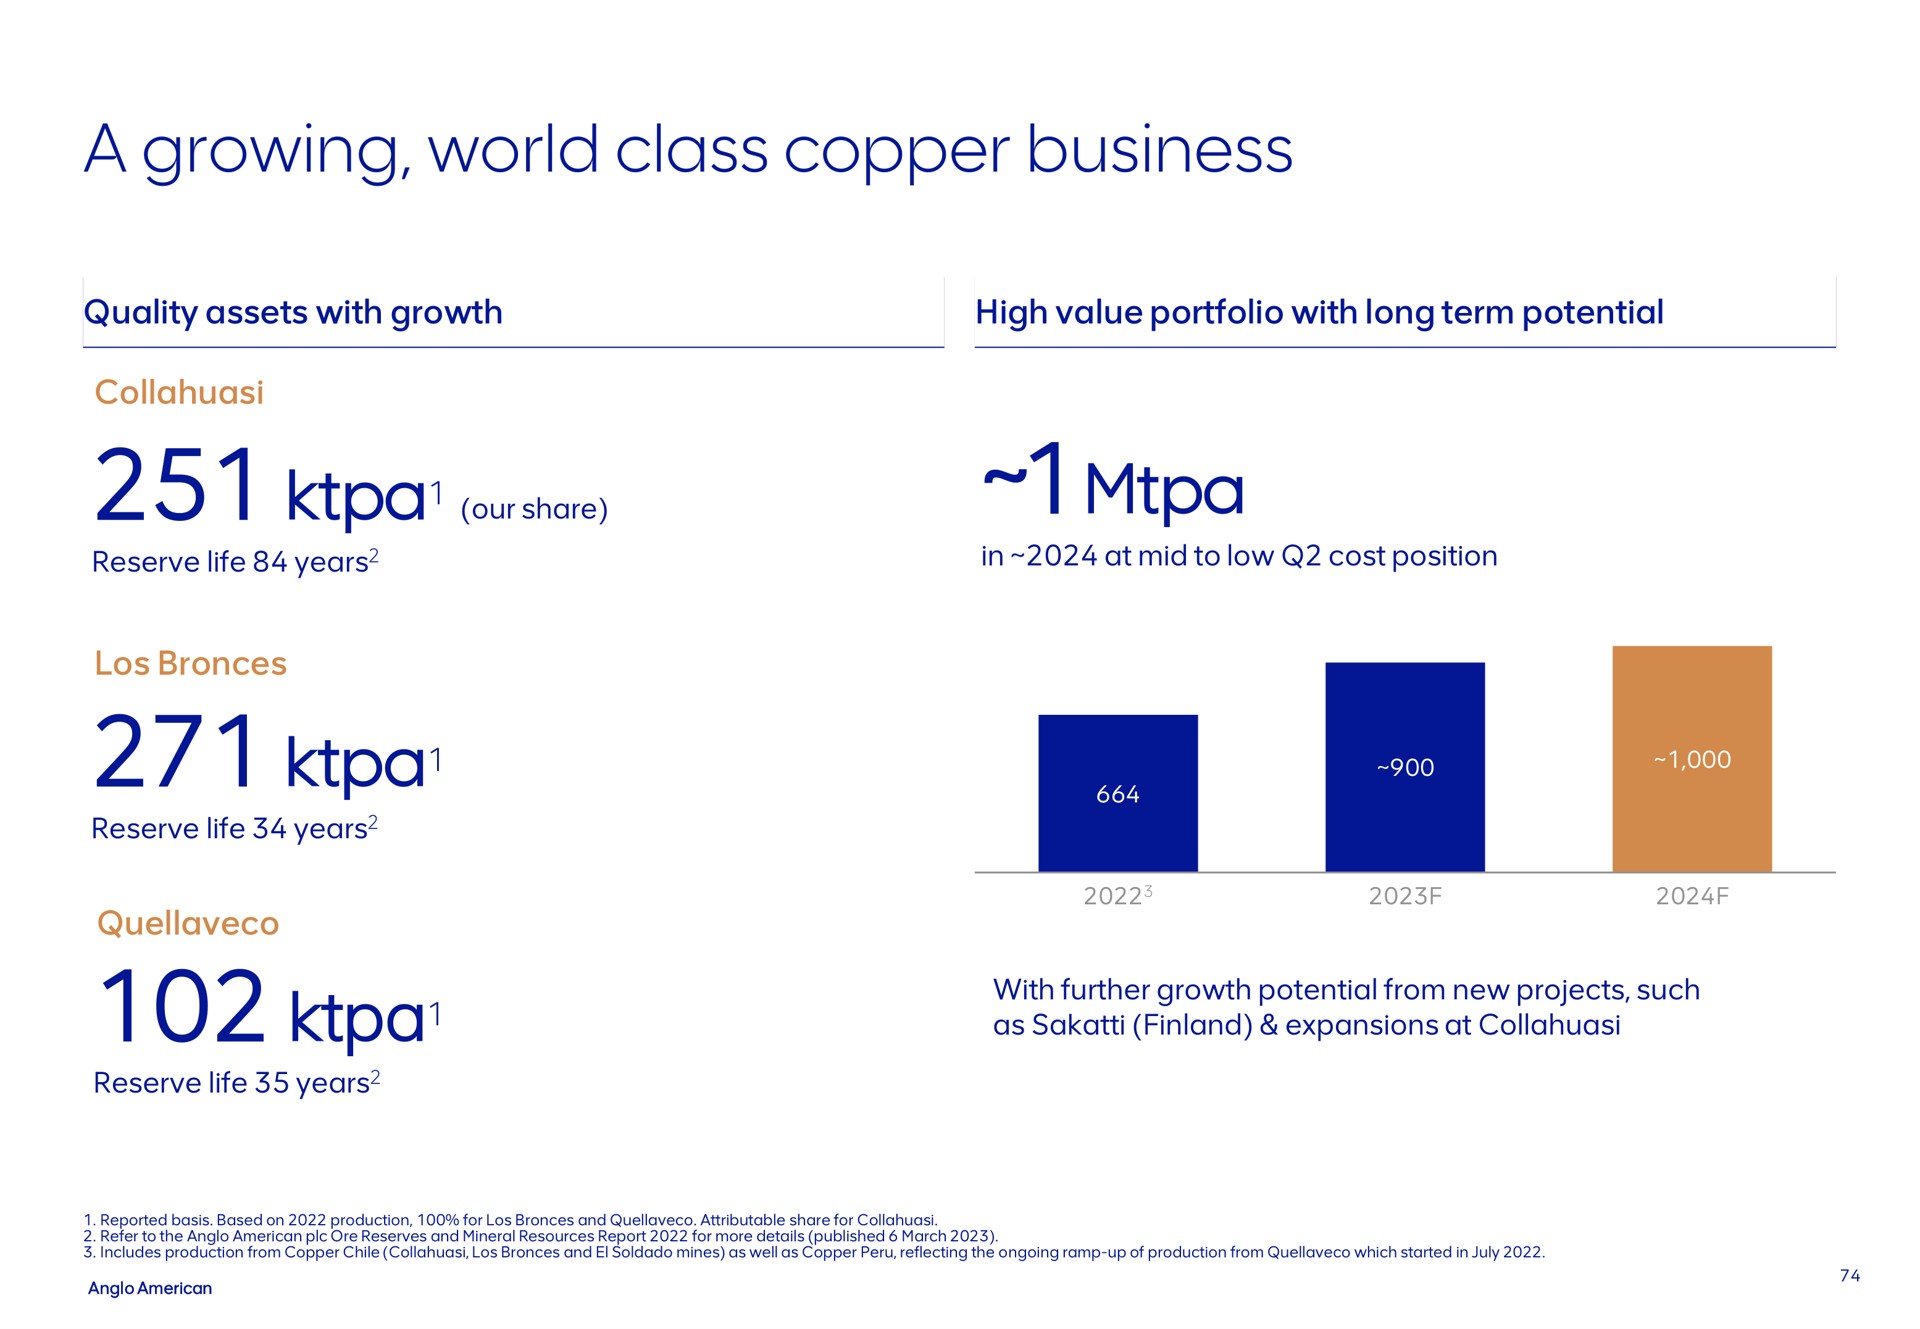 a growing world class copper business | AngloAmerican